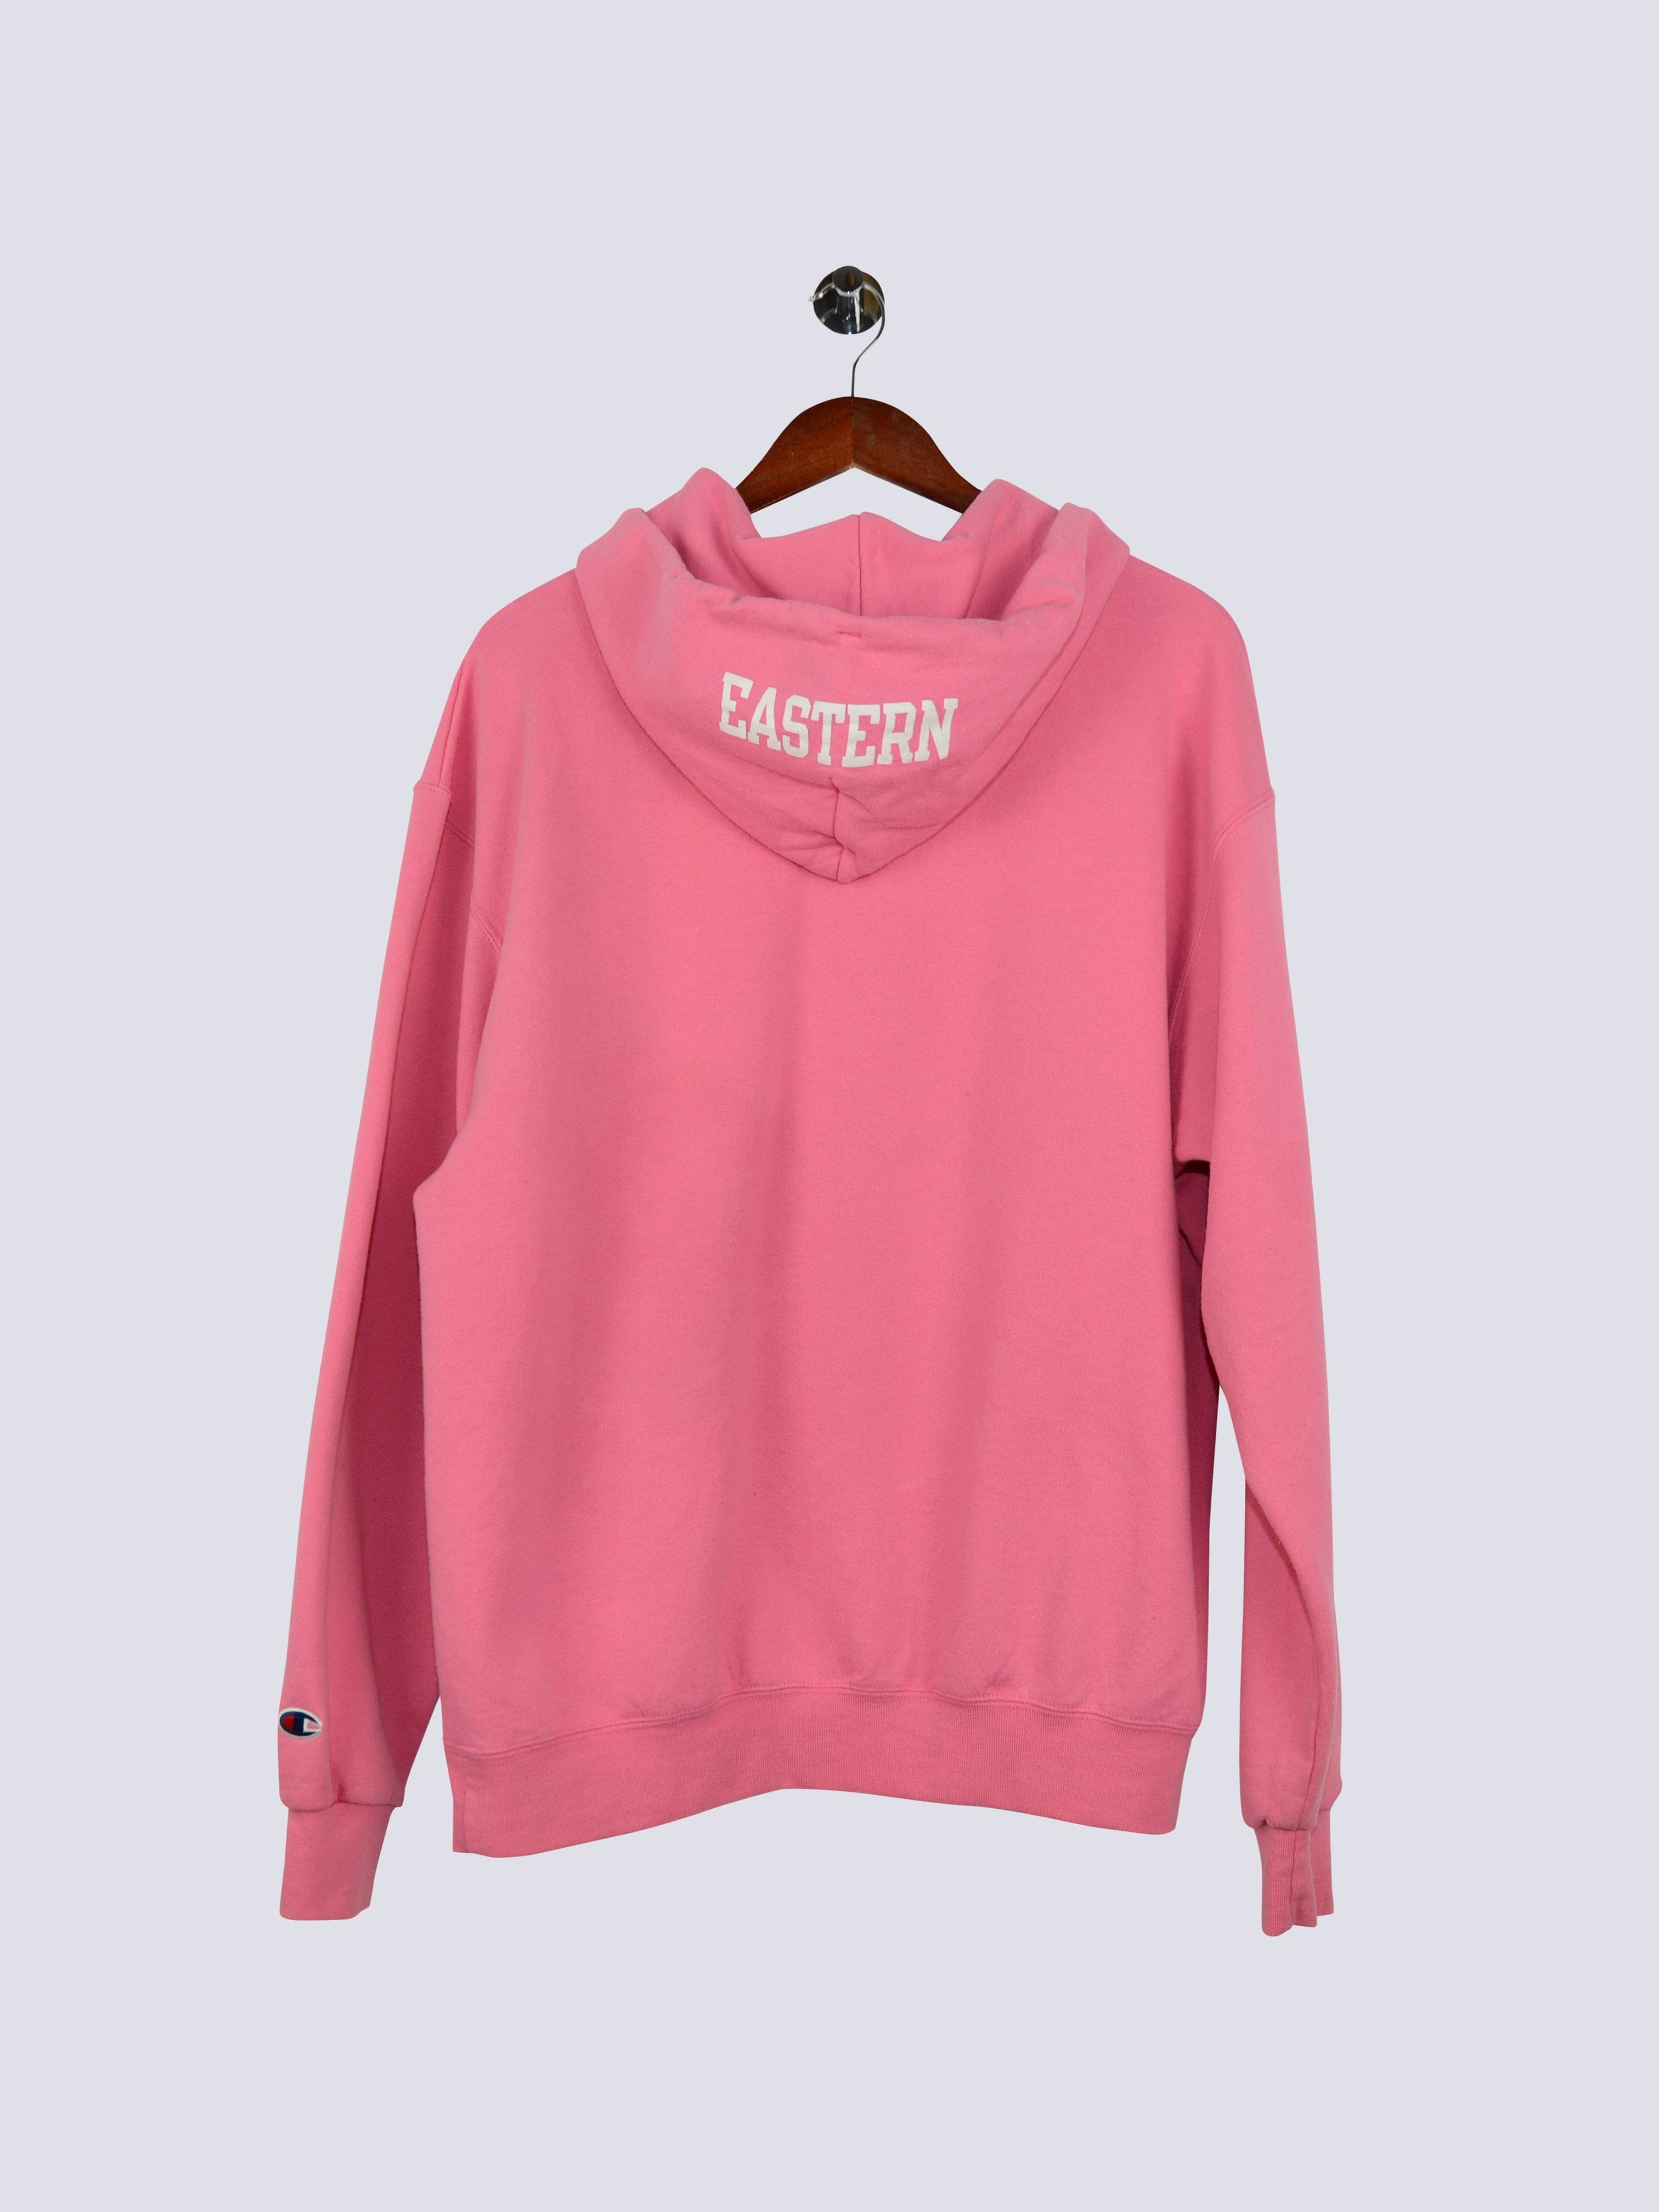 Champion Connecticut State University Hoodie Pink // Large - RHAGHOUSE VINTAGE